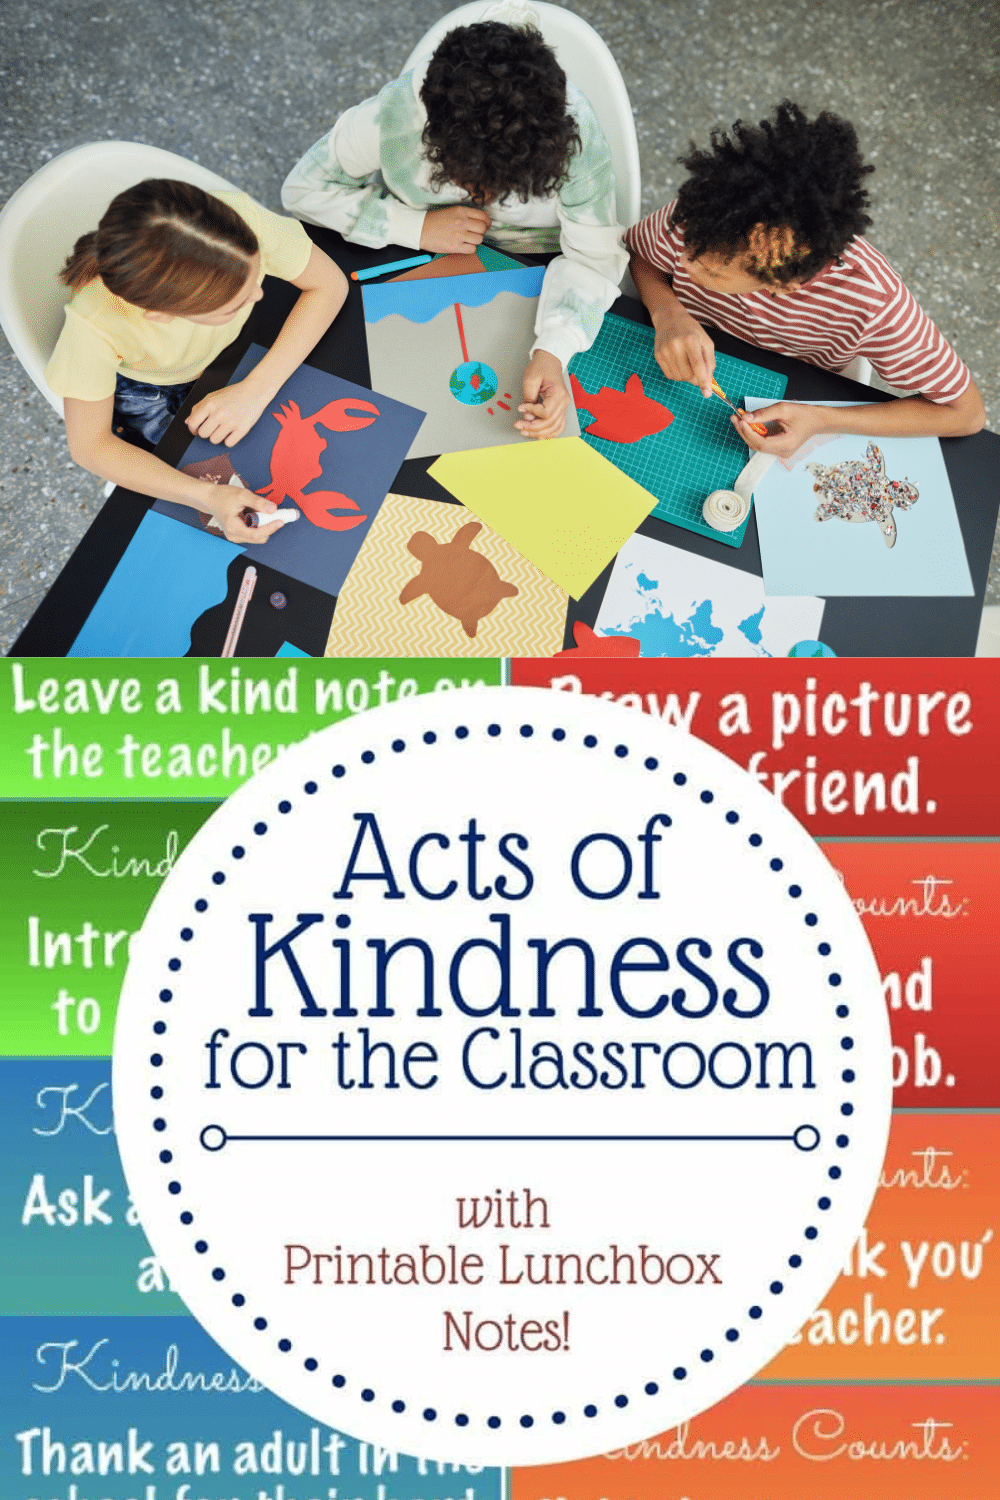 Here are 20 suggestions for acts of kindness to encourage kids to carry out while at school, and printable lunchbox notes to go along with them! #randomactsofkindness #kindness #forkids #printable #lunchboxnotes via @wondermomwannab